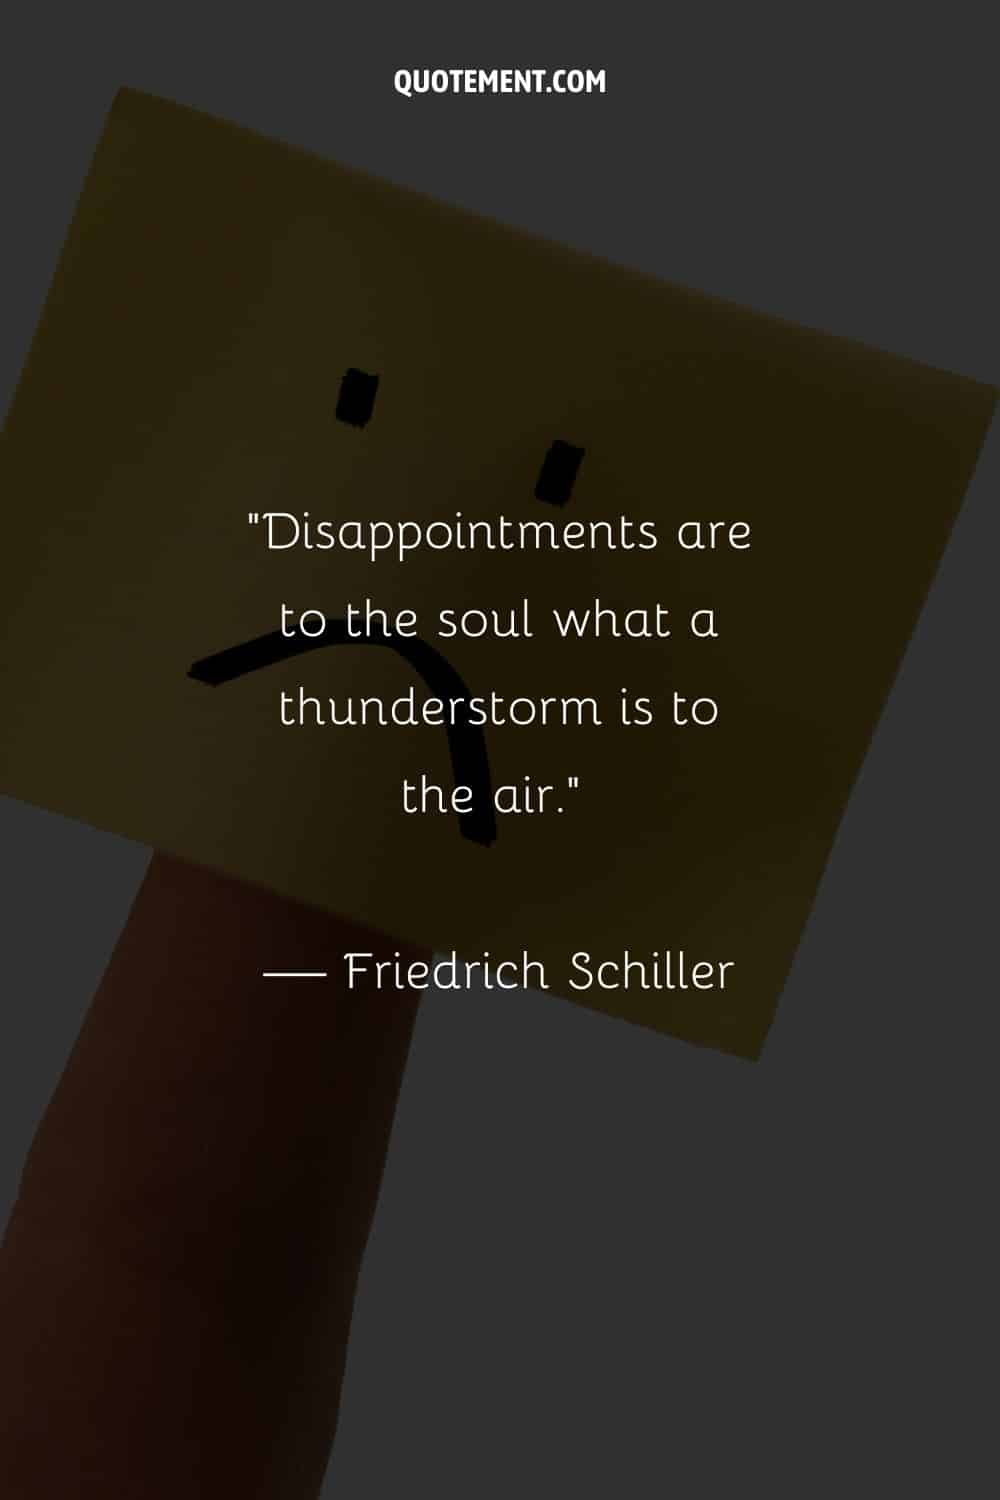 Disappointments are to the soul what a thunderstorm is to the air